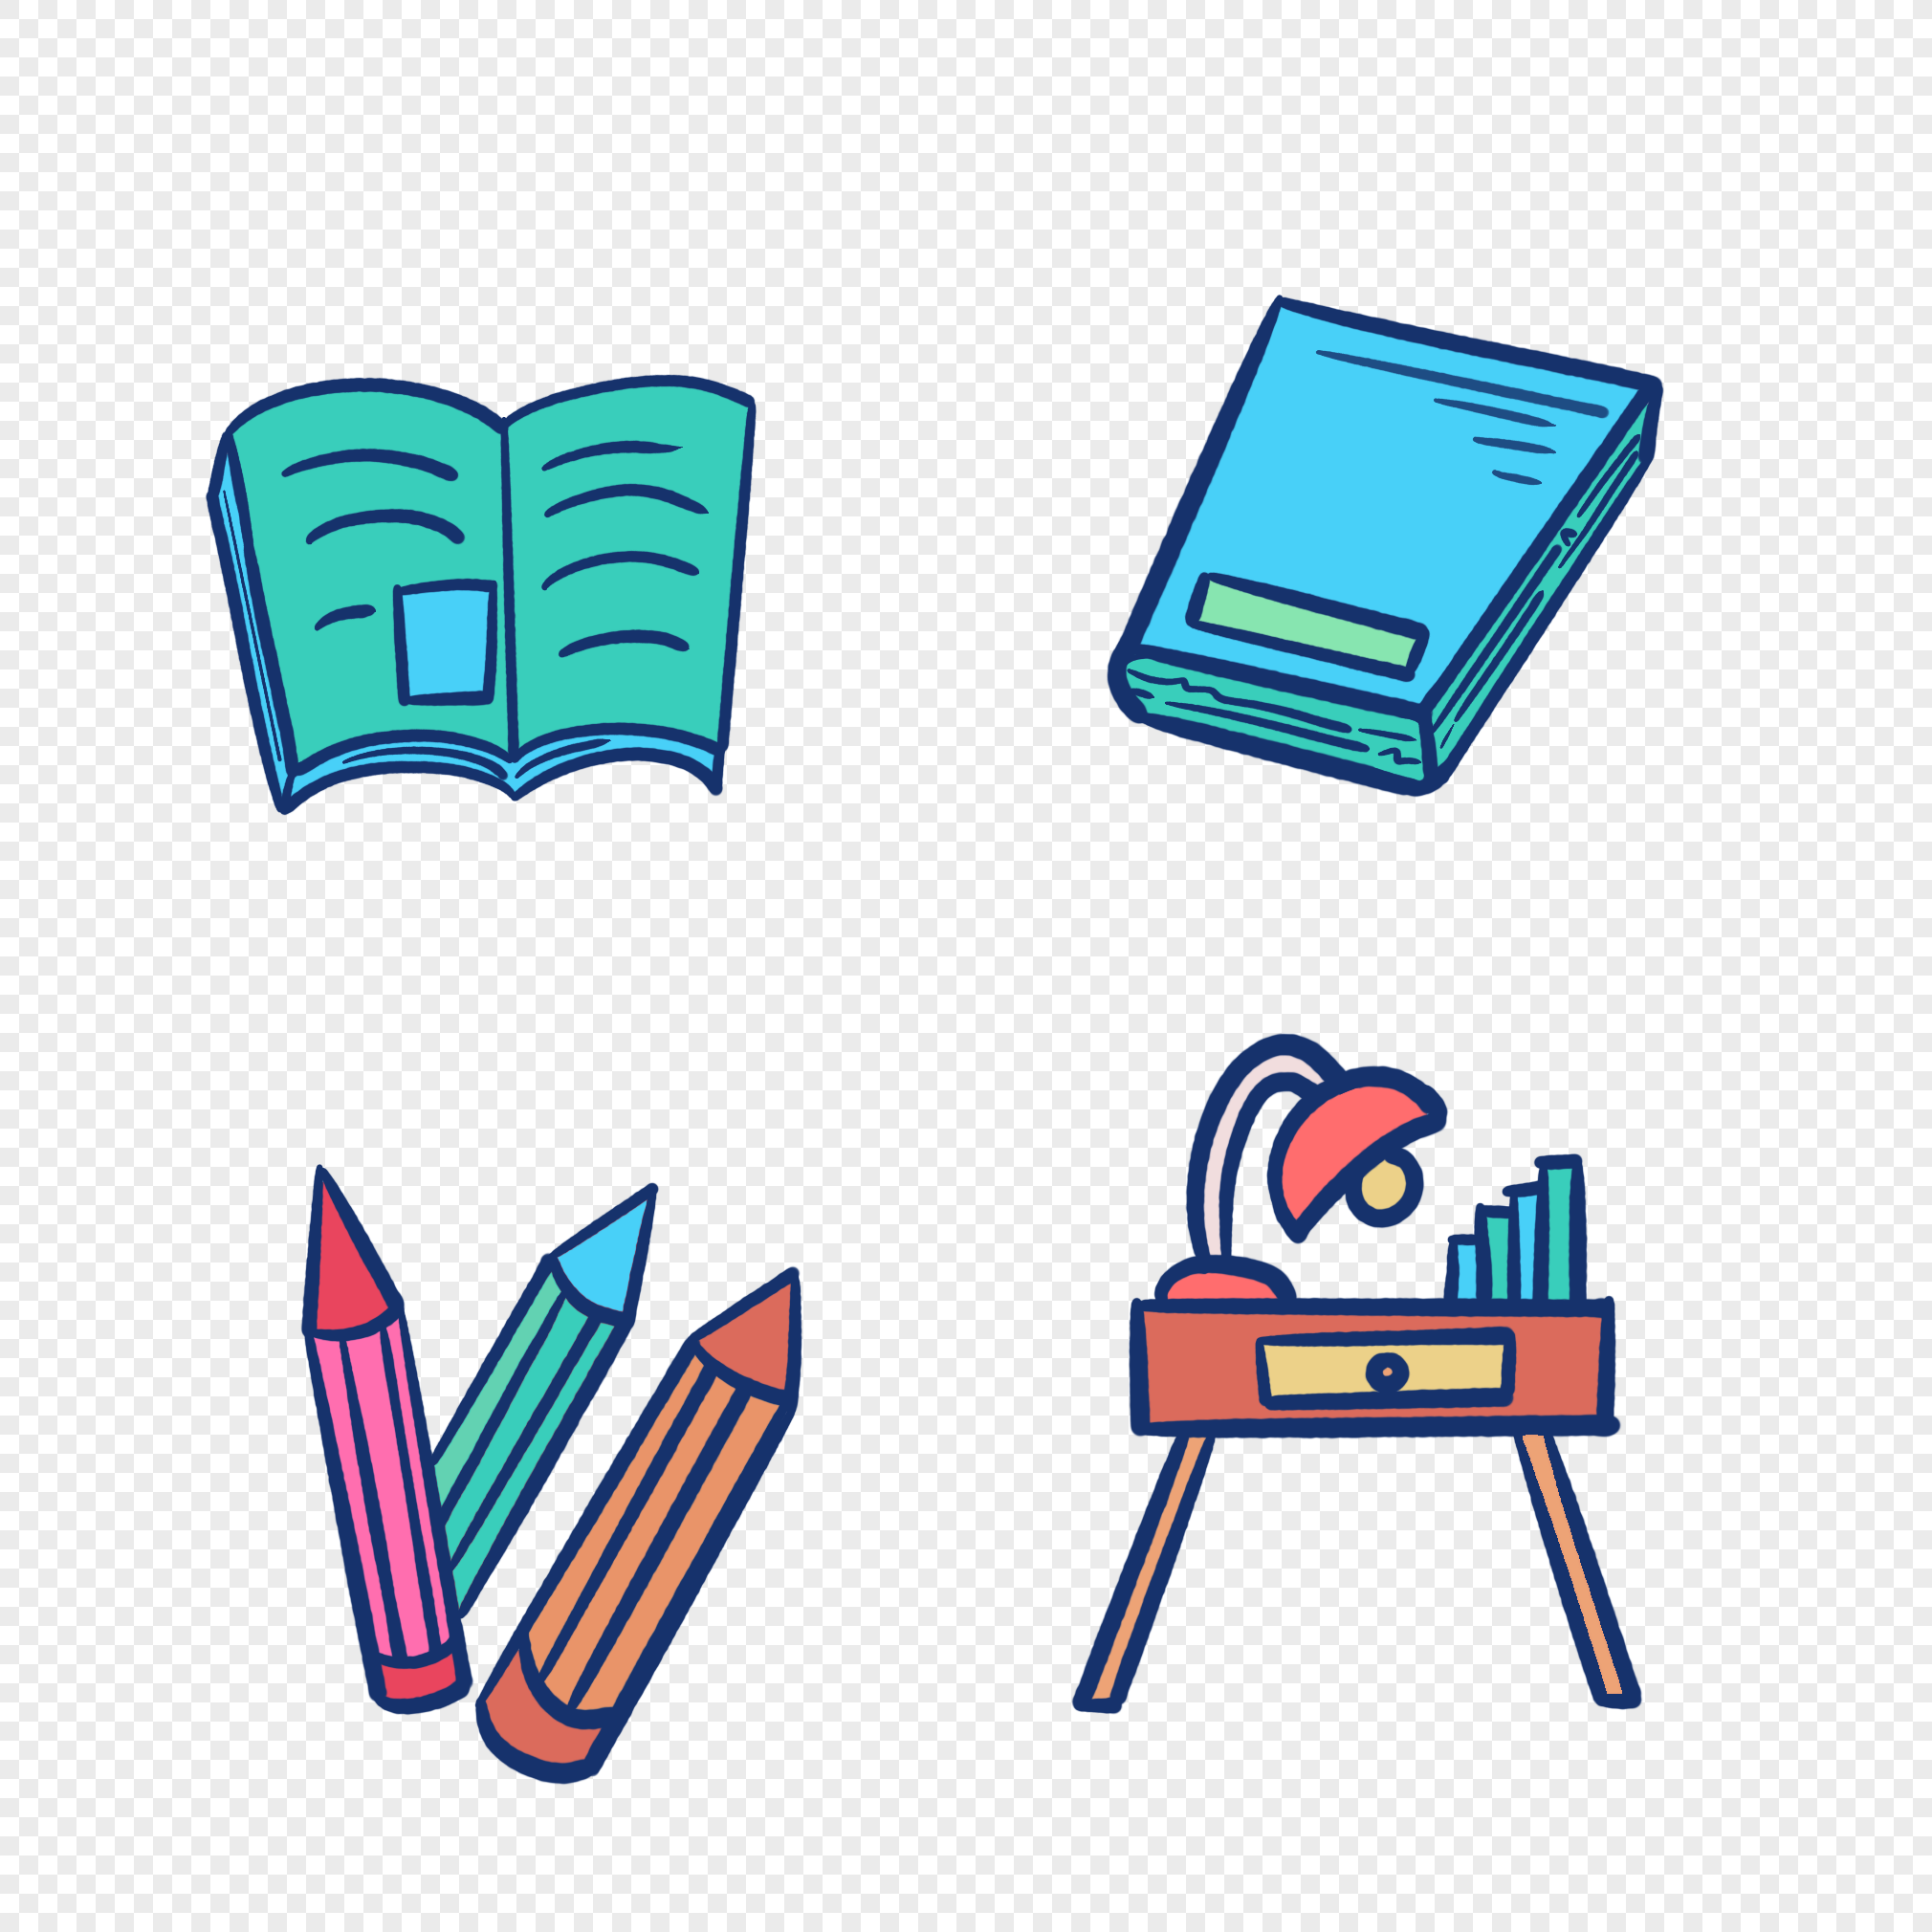 Must-have crayon desk textbook for the beginning of the school s, Books,  textbooks,  notebooks png image free download